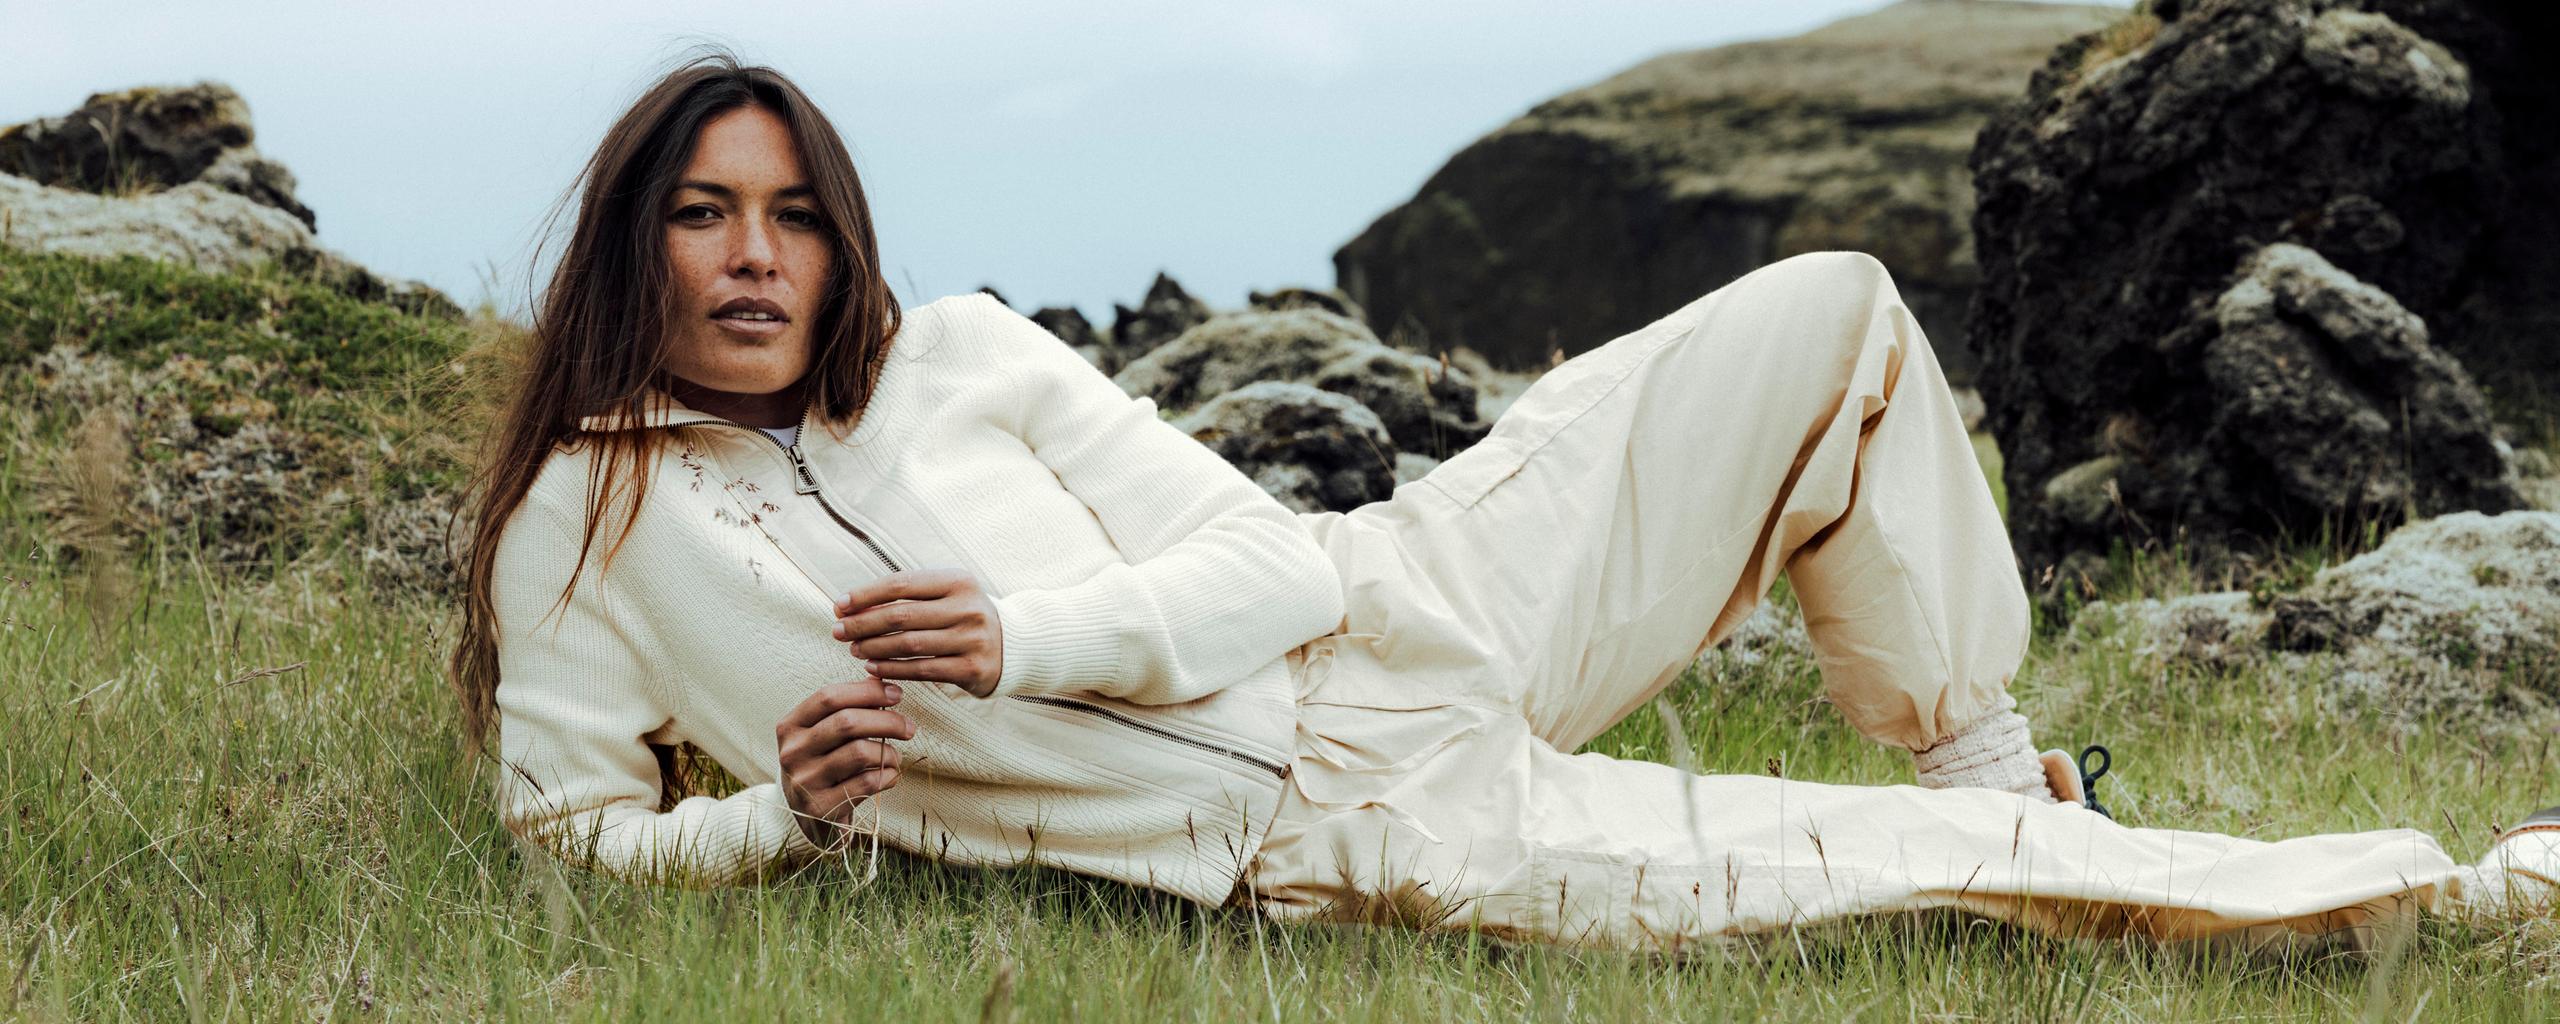 Woman laying on grass in white outfit alongside Iceland coast